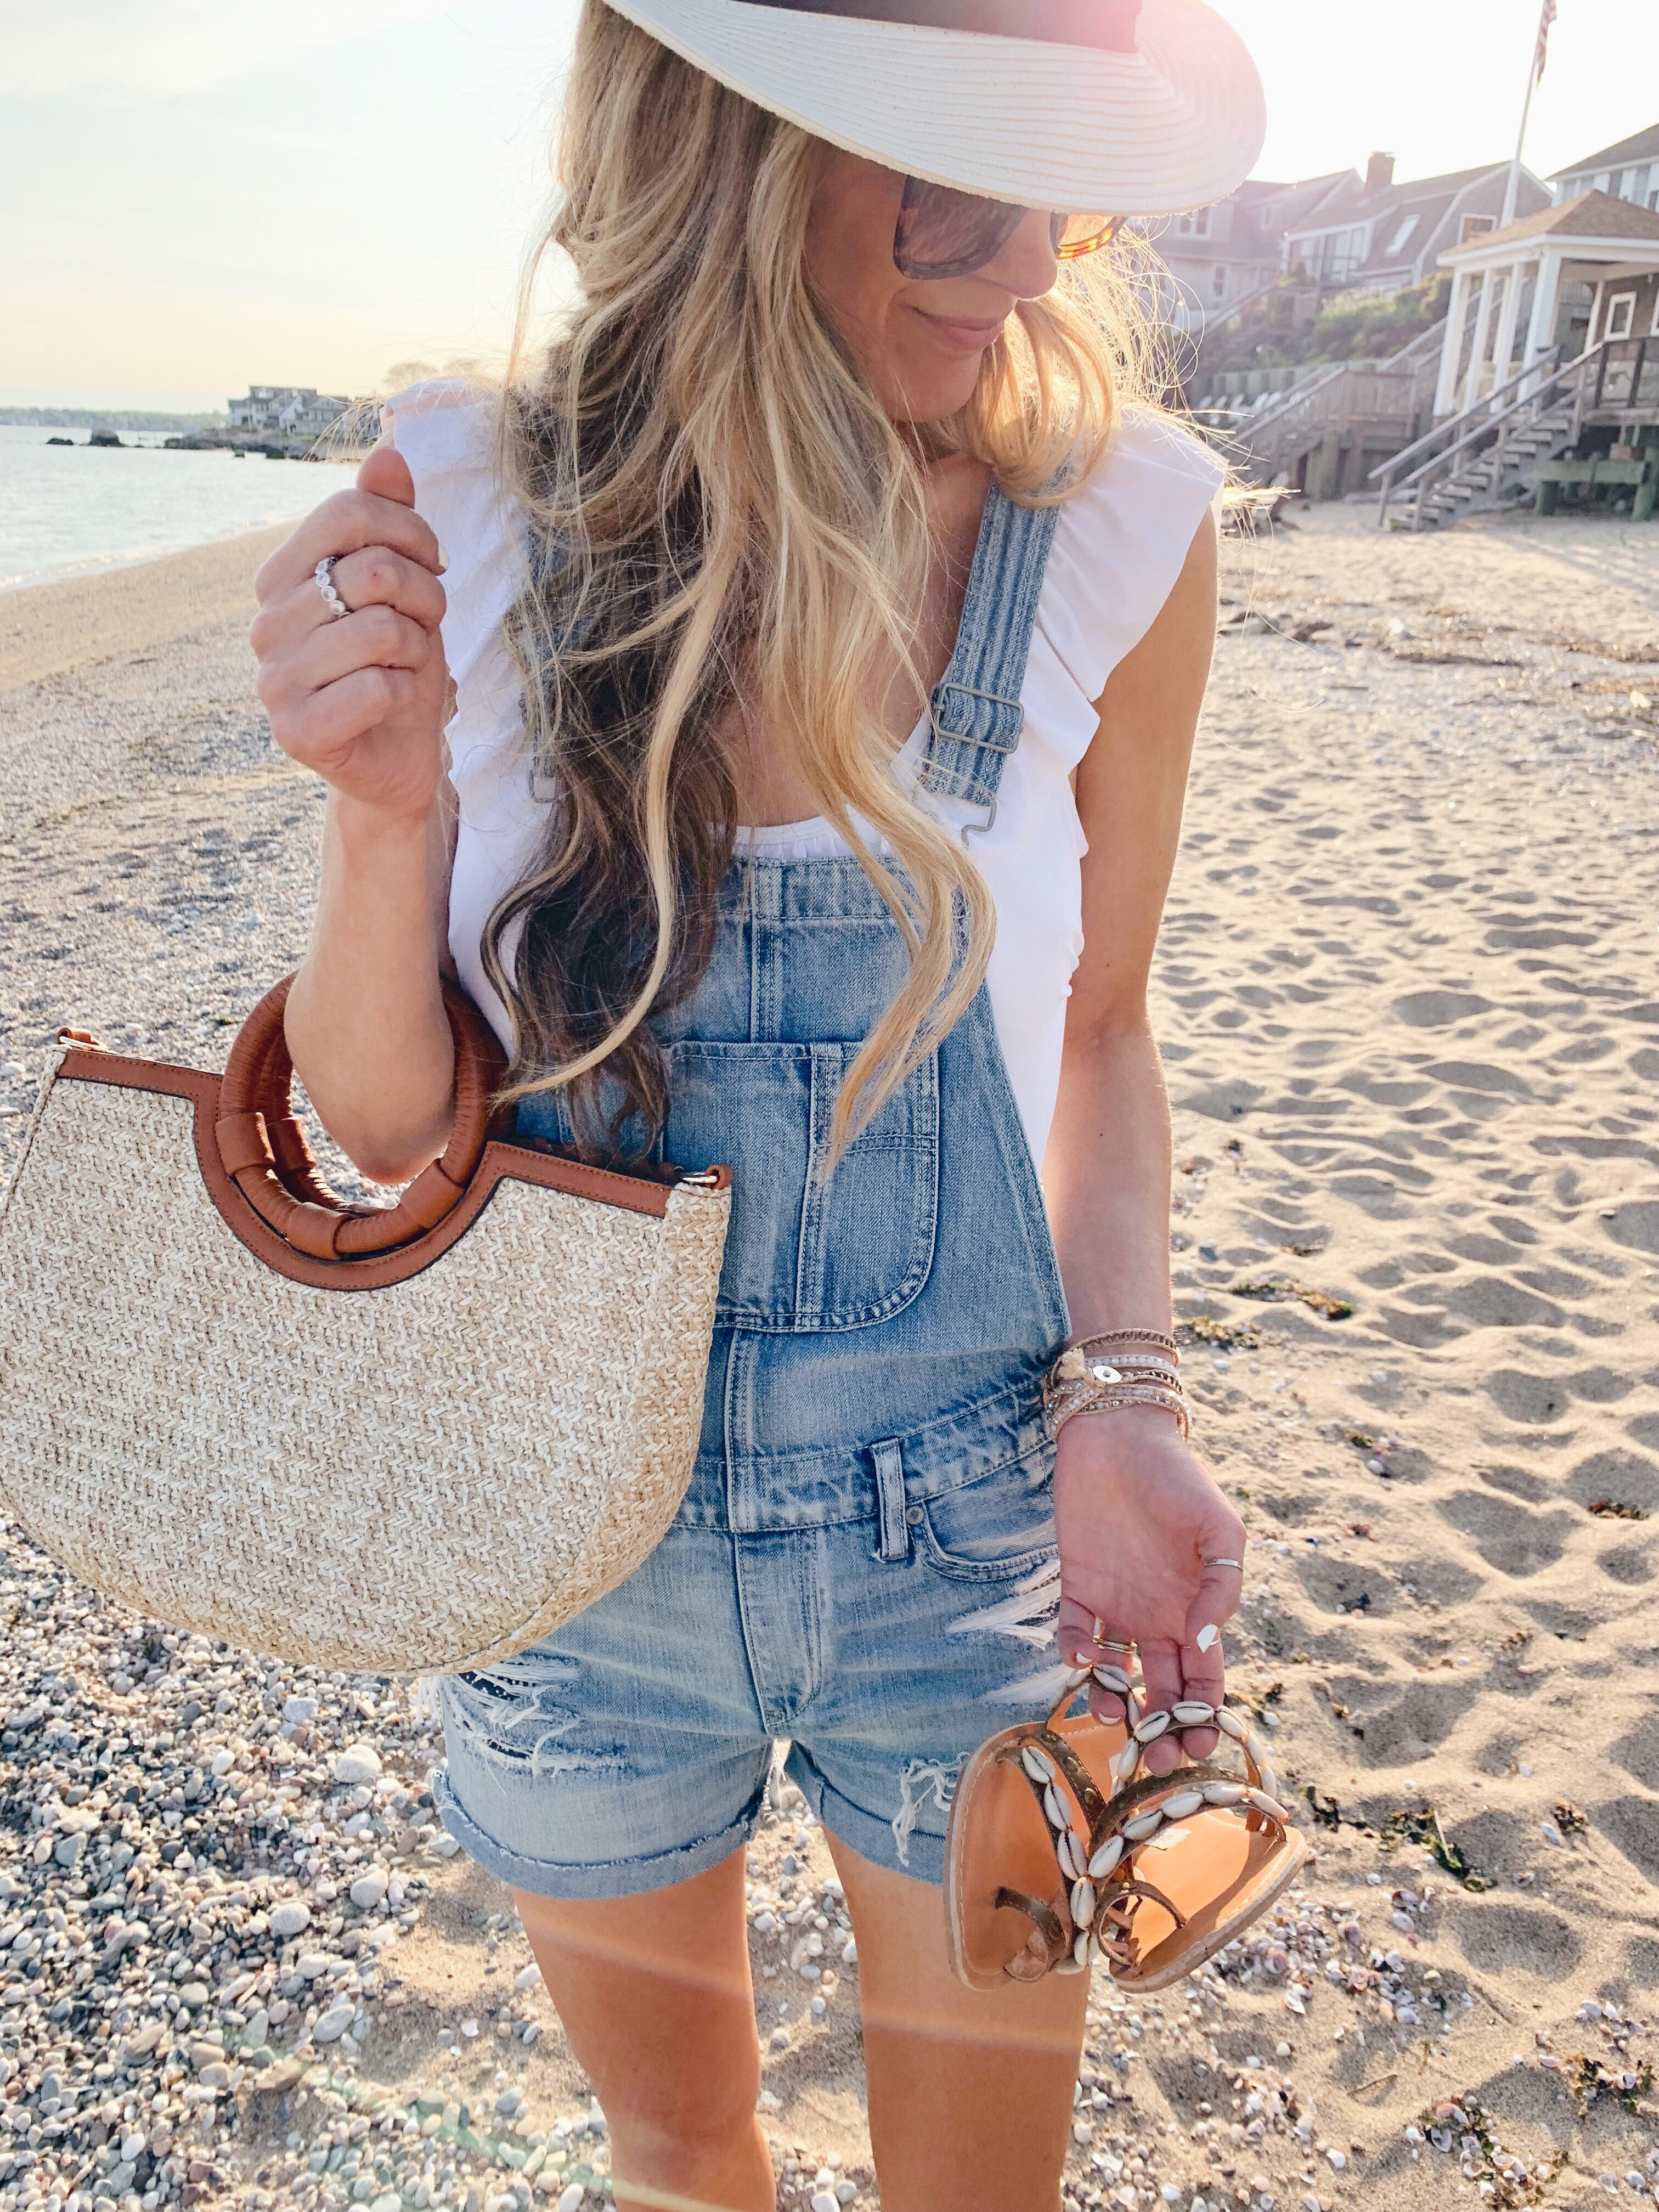 memorial day weekend sales and outfit ideas - overall shorts as a swim coverup - pinteresting plans connecticut fashion blogger